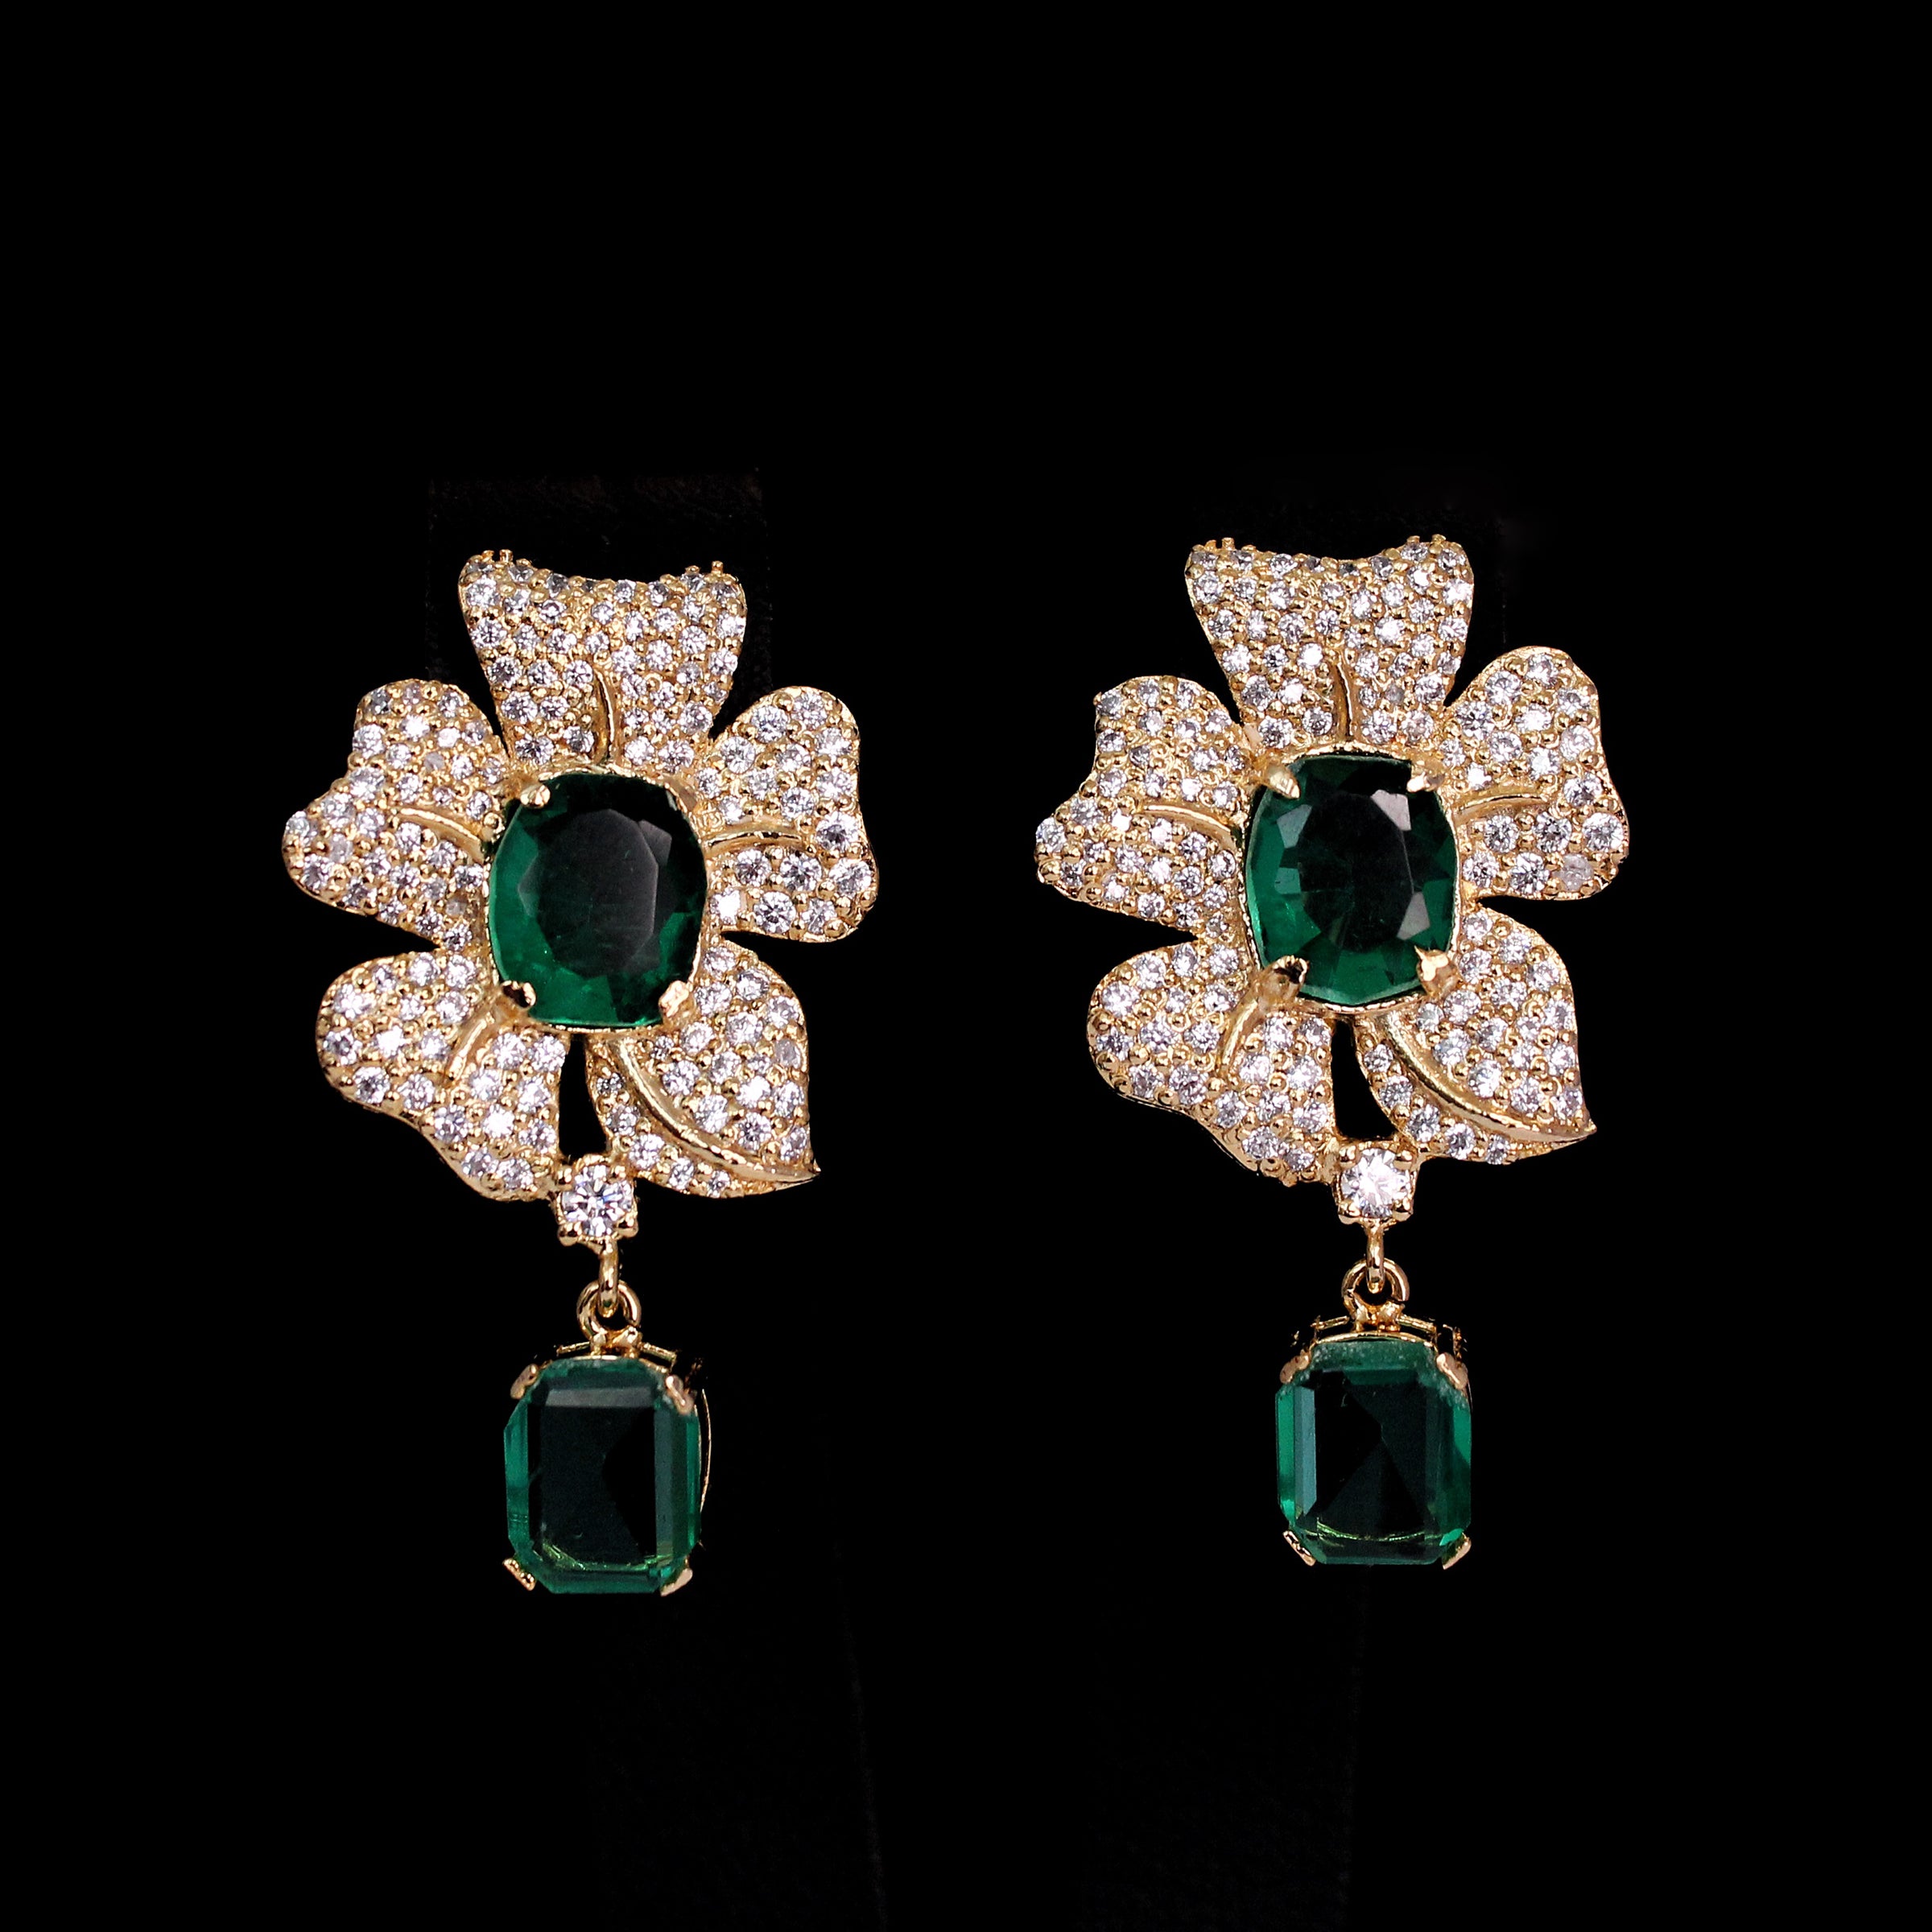 Latest Products 45.00 usd for Flower Shaped Earrings Boutiques